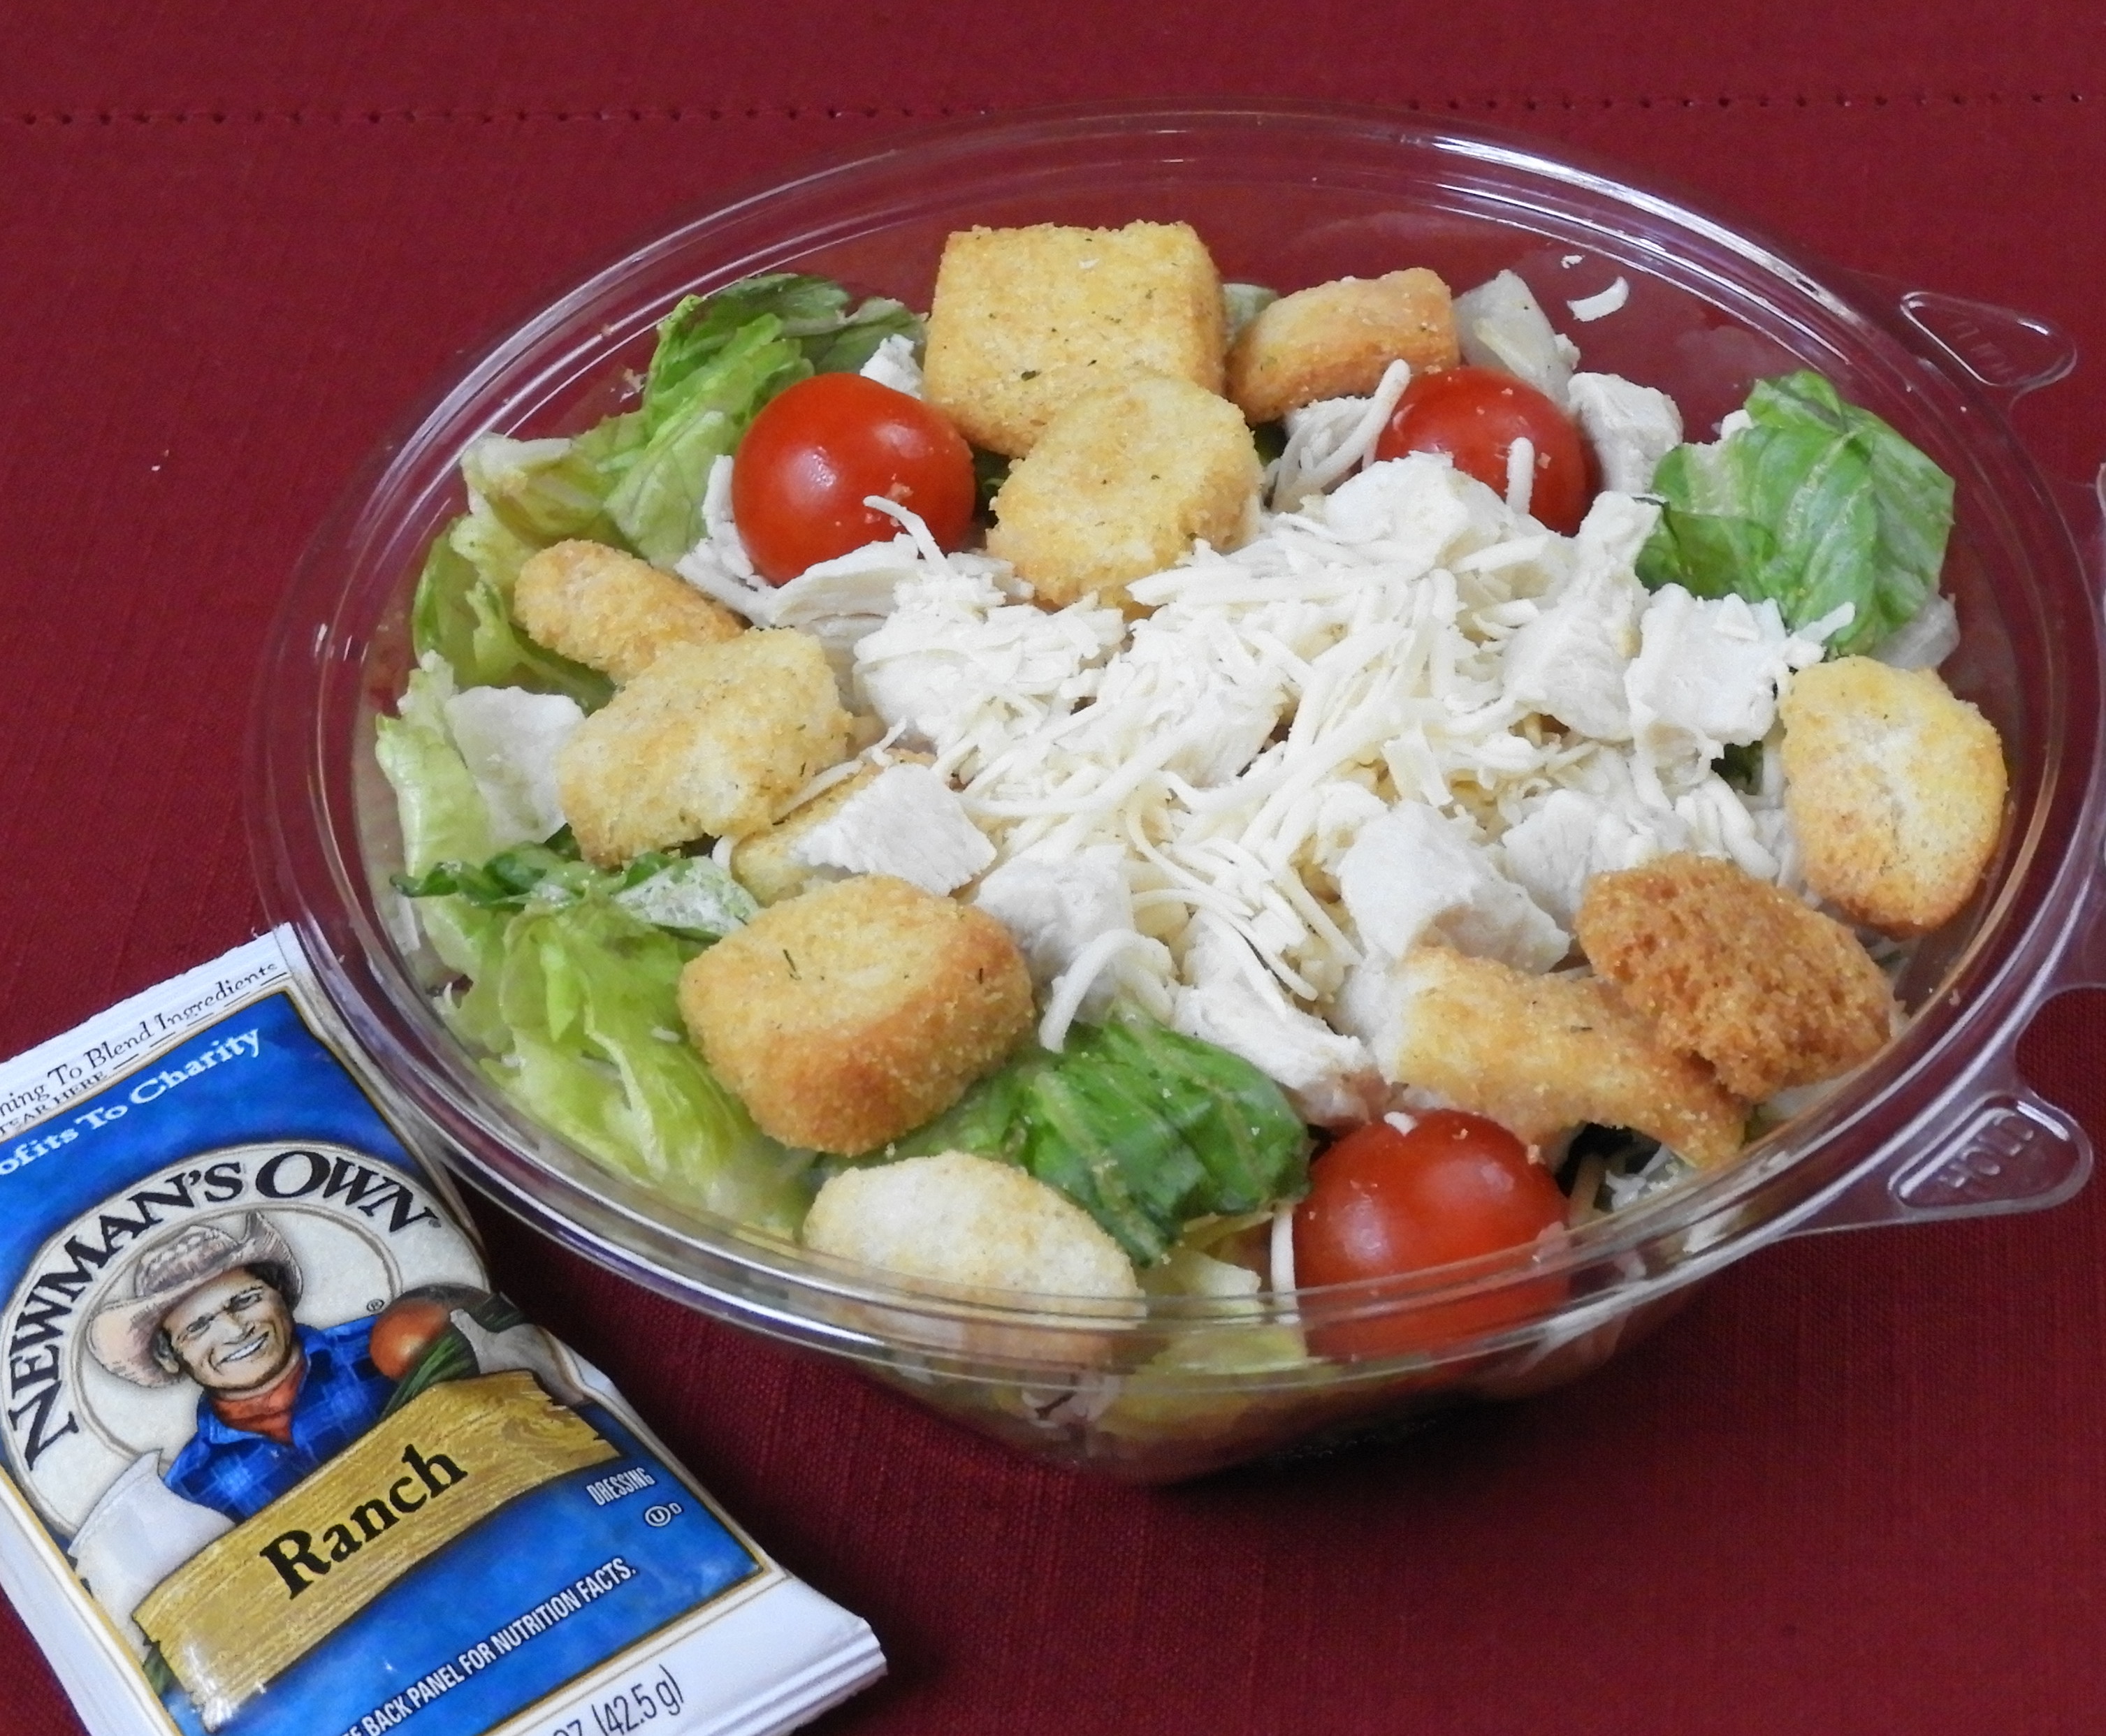 Salad with dressing.